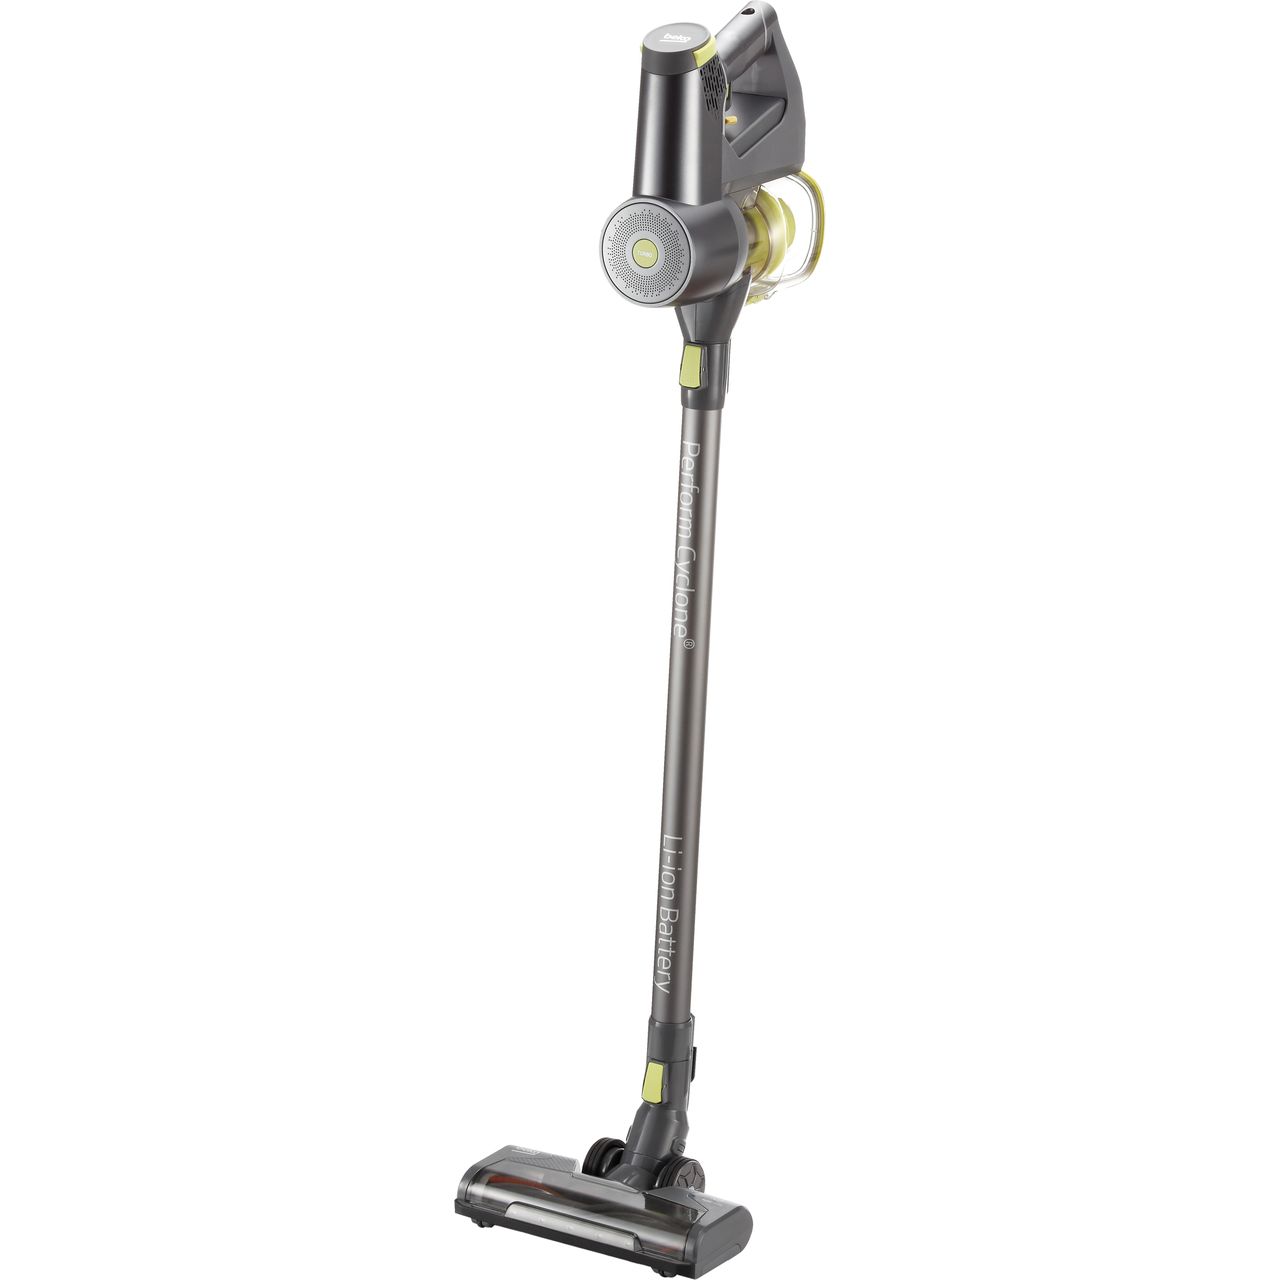 Beko VRT82821BV Cordless Vacuum Cleaner with up to 40 Minutes Run Time Review